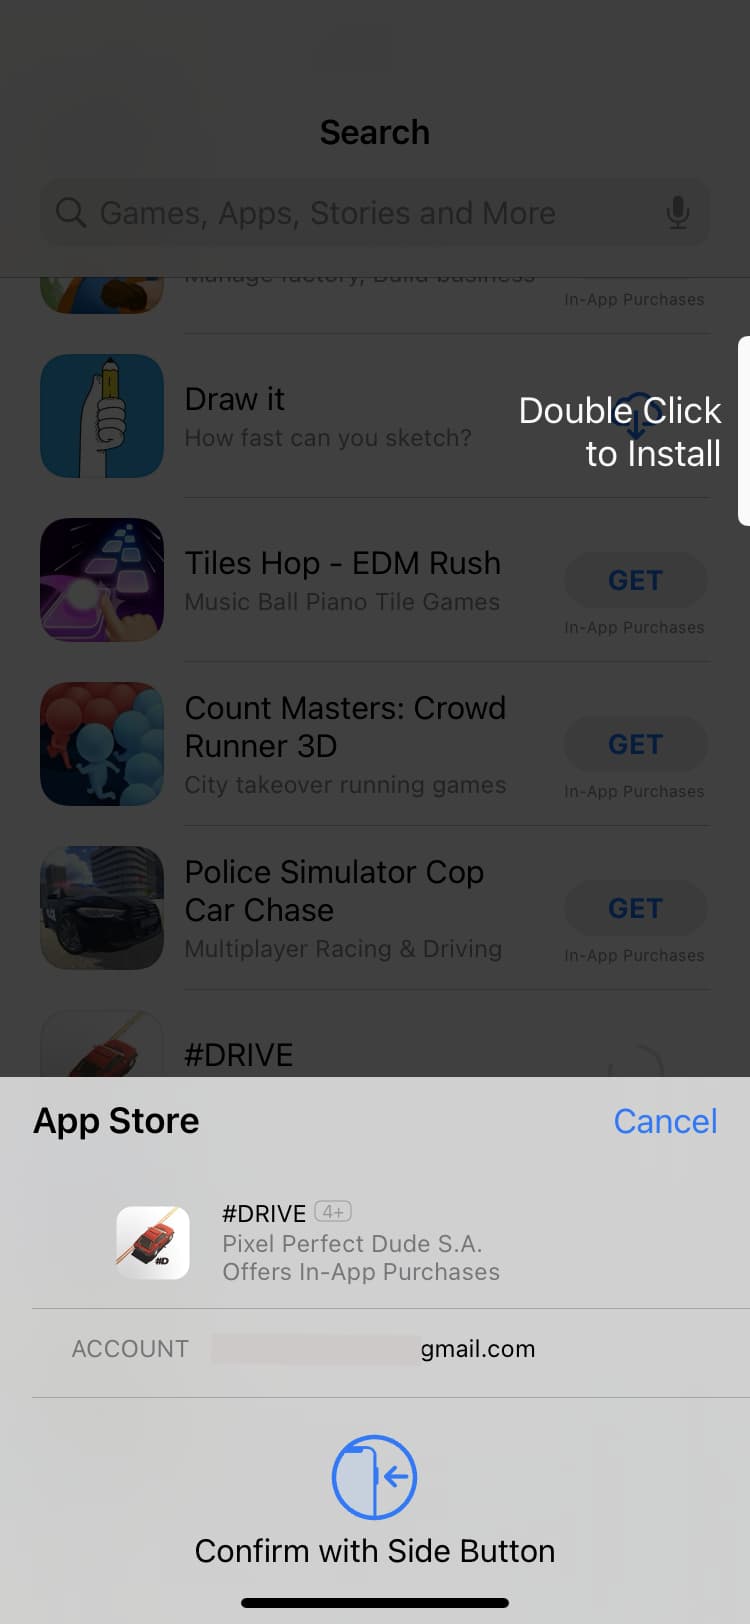 How to download apps on iPhone without Apple ID password, Face ID, or Touch ID authentication